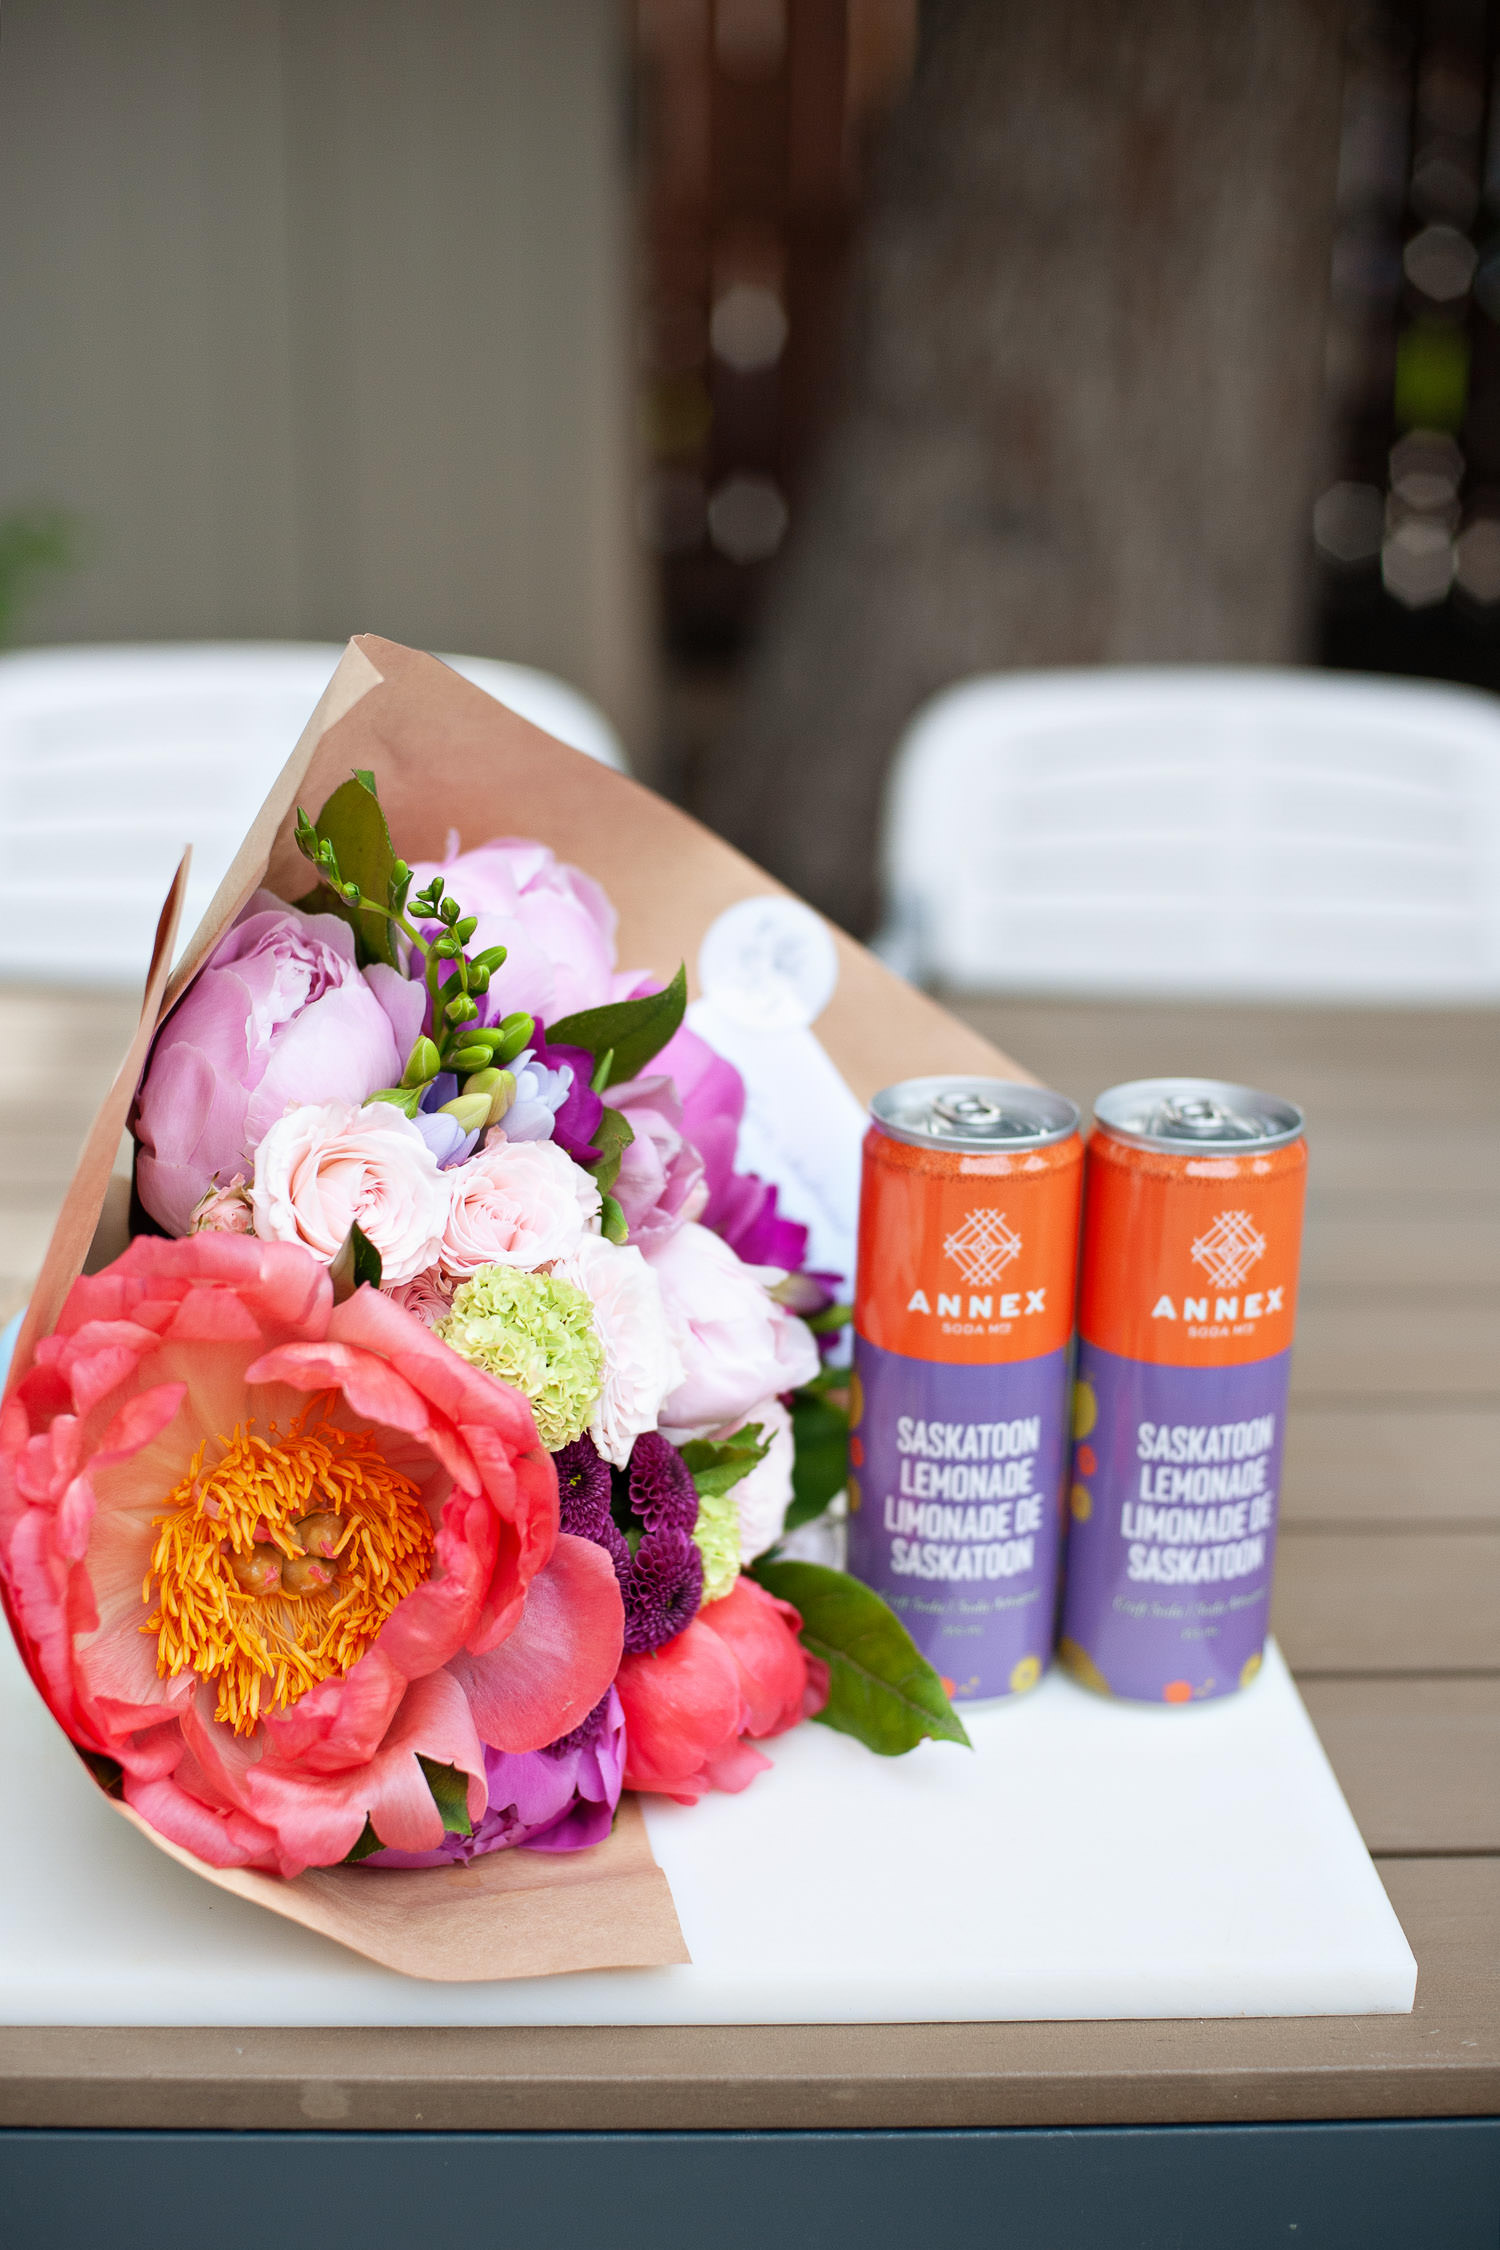 Bouquet of Peonies and Saskatoon Lemonade from Annex captured by Tara Whittaker Photography